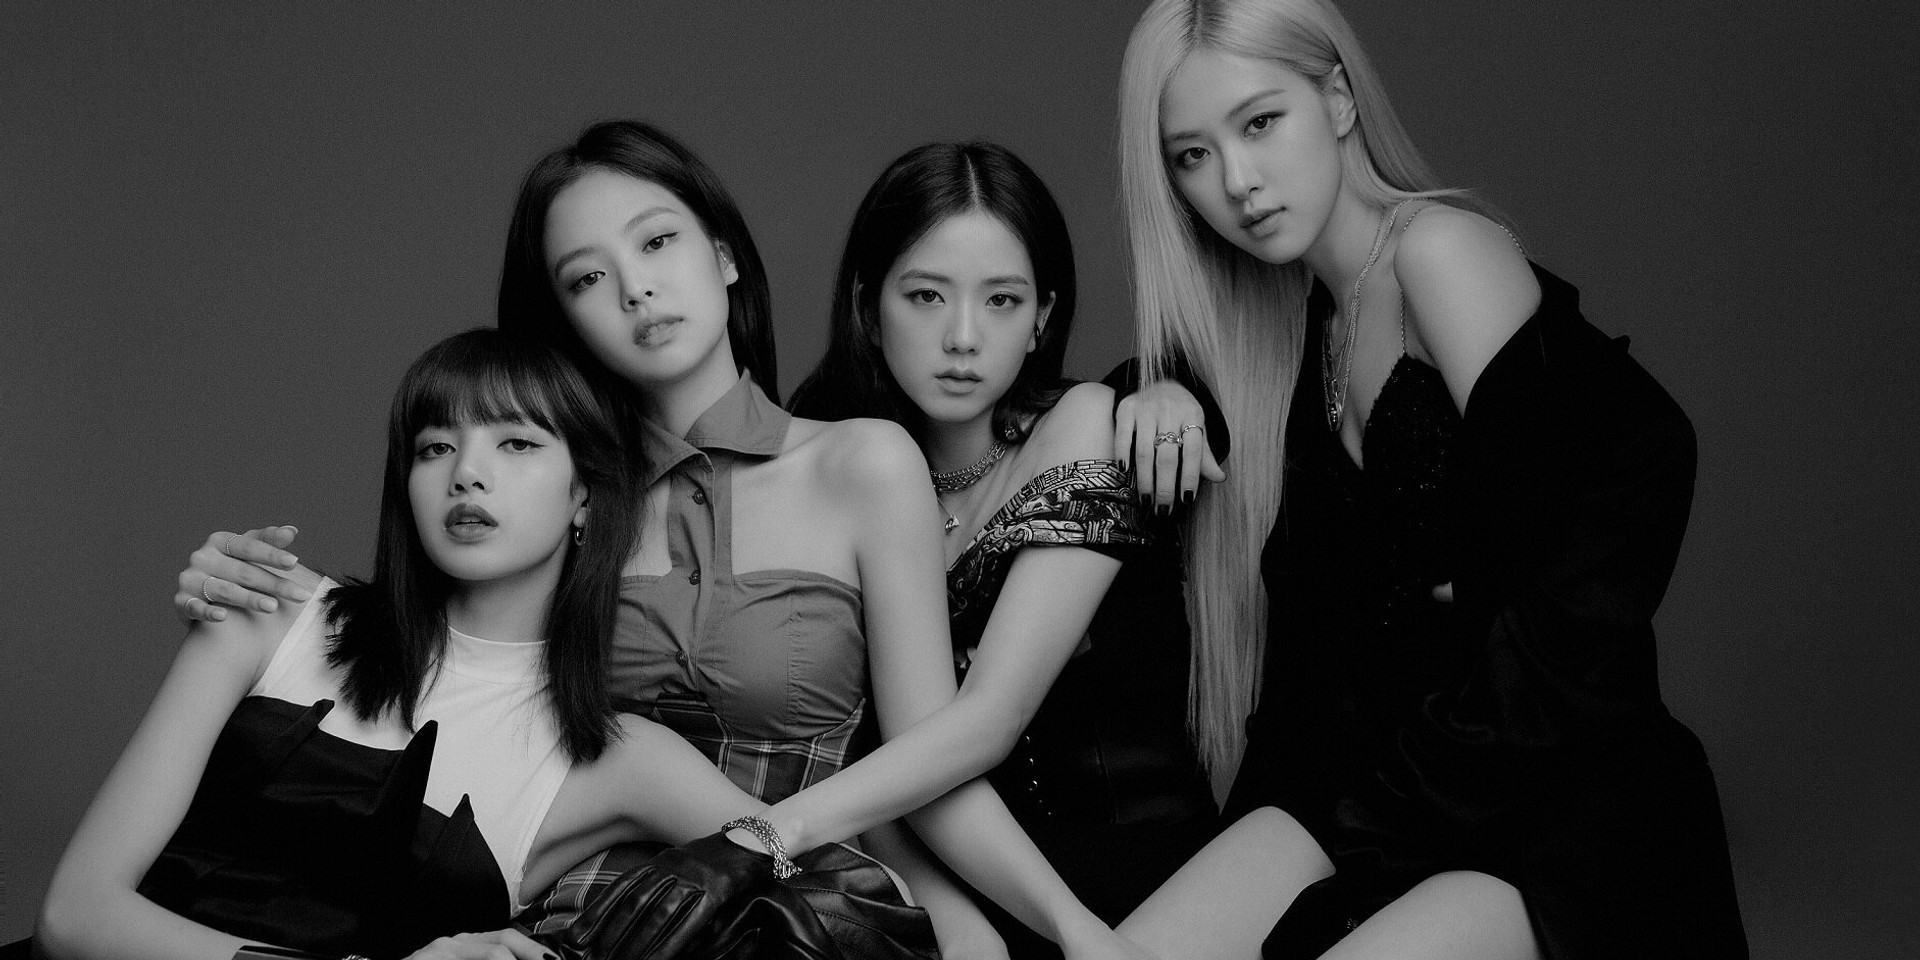 BLACKPINK's new album is coming this September, 'BORN PINK' world tour kicks off in October